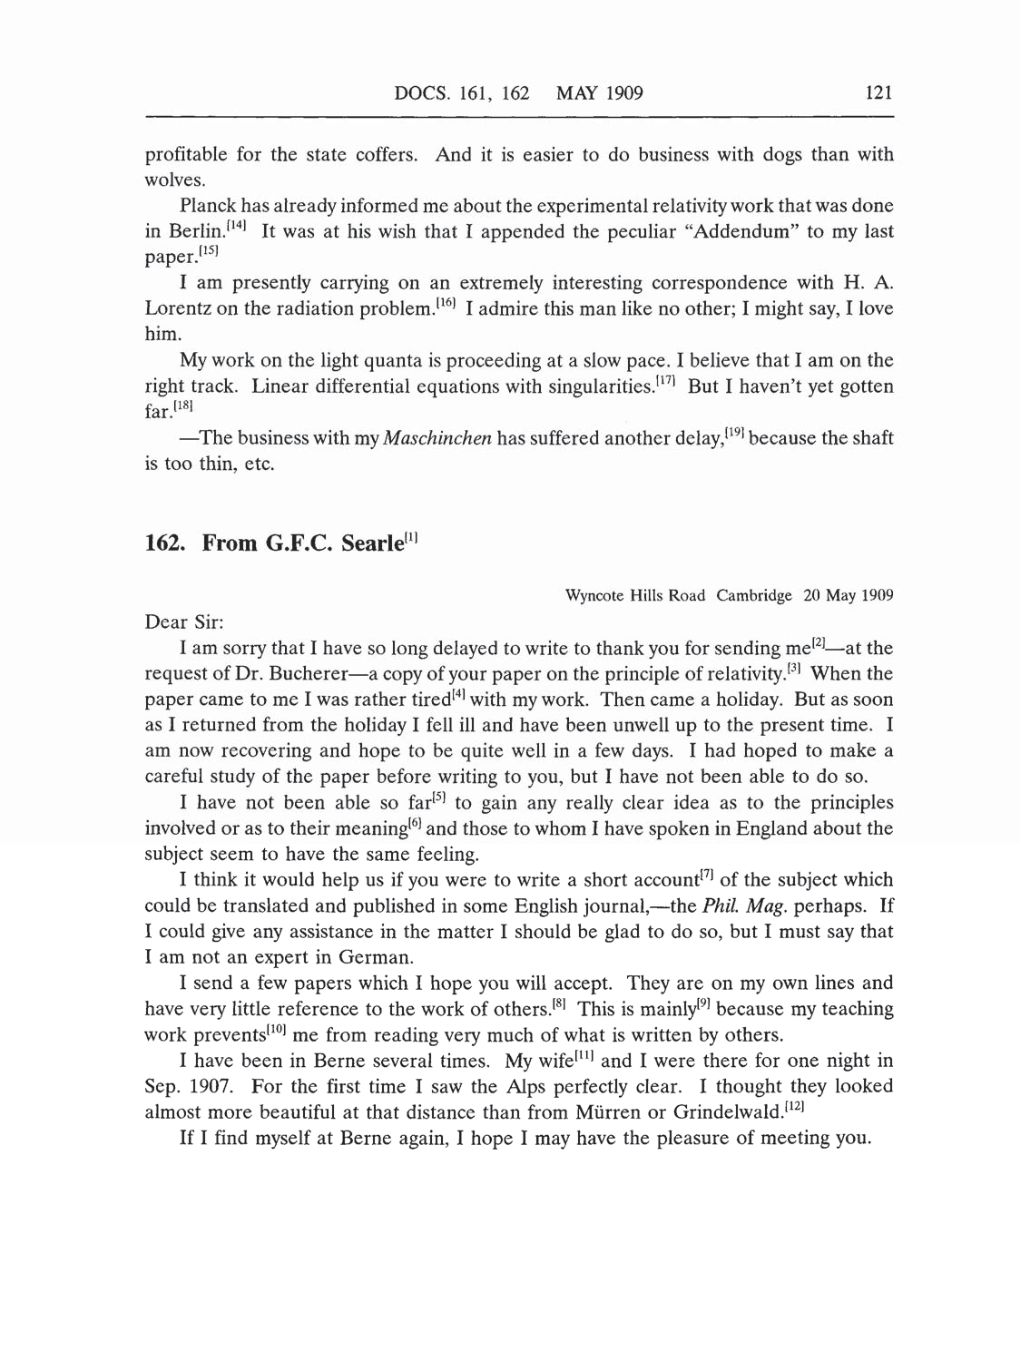 Volume 5: The Swiss Years: Correspondence, 1902-1914 (English translation supplement) page 121